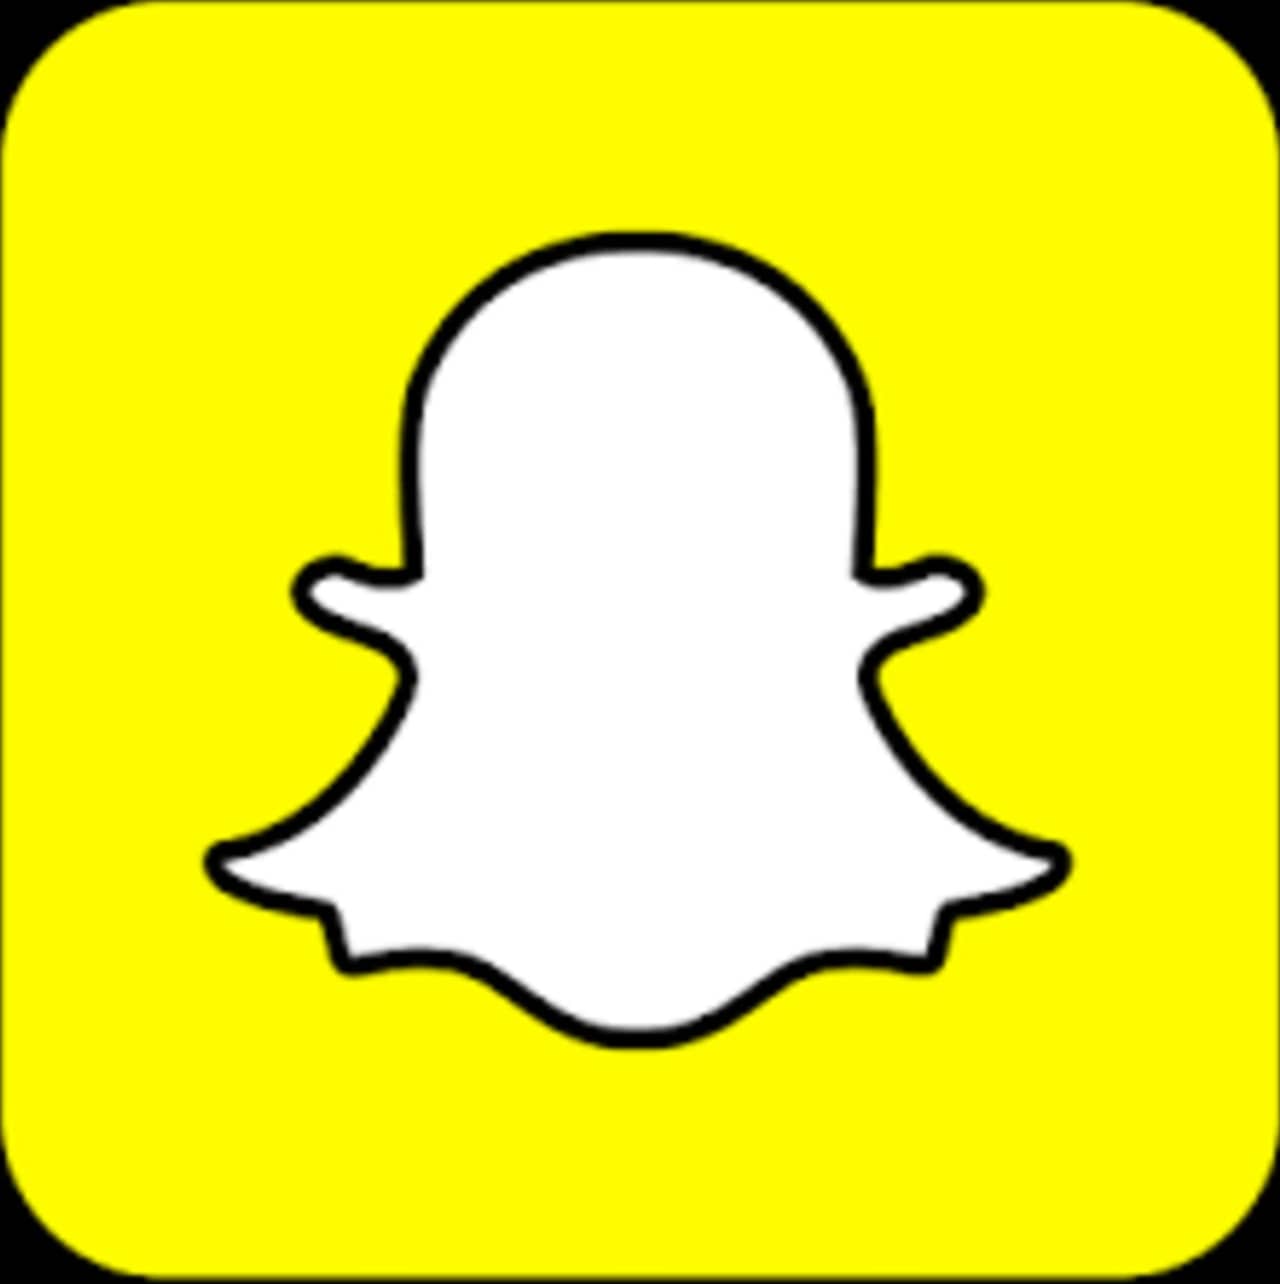 Snapchat has introduced a new feature that could pose a risk to teenagers.